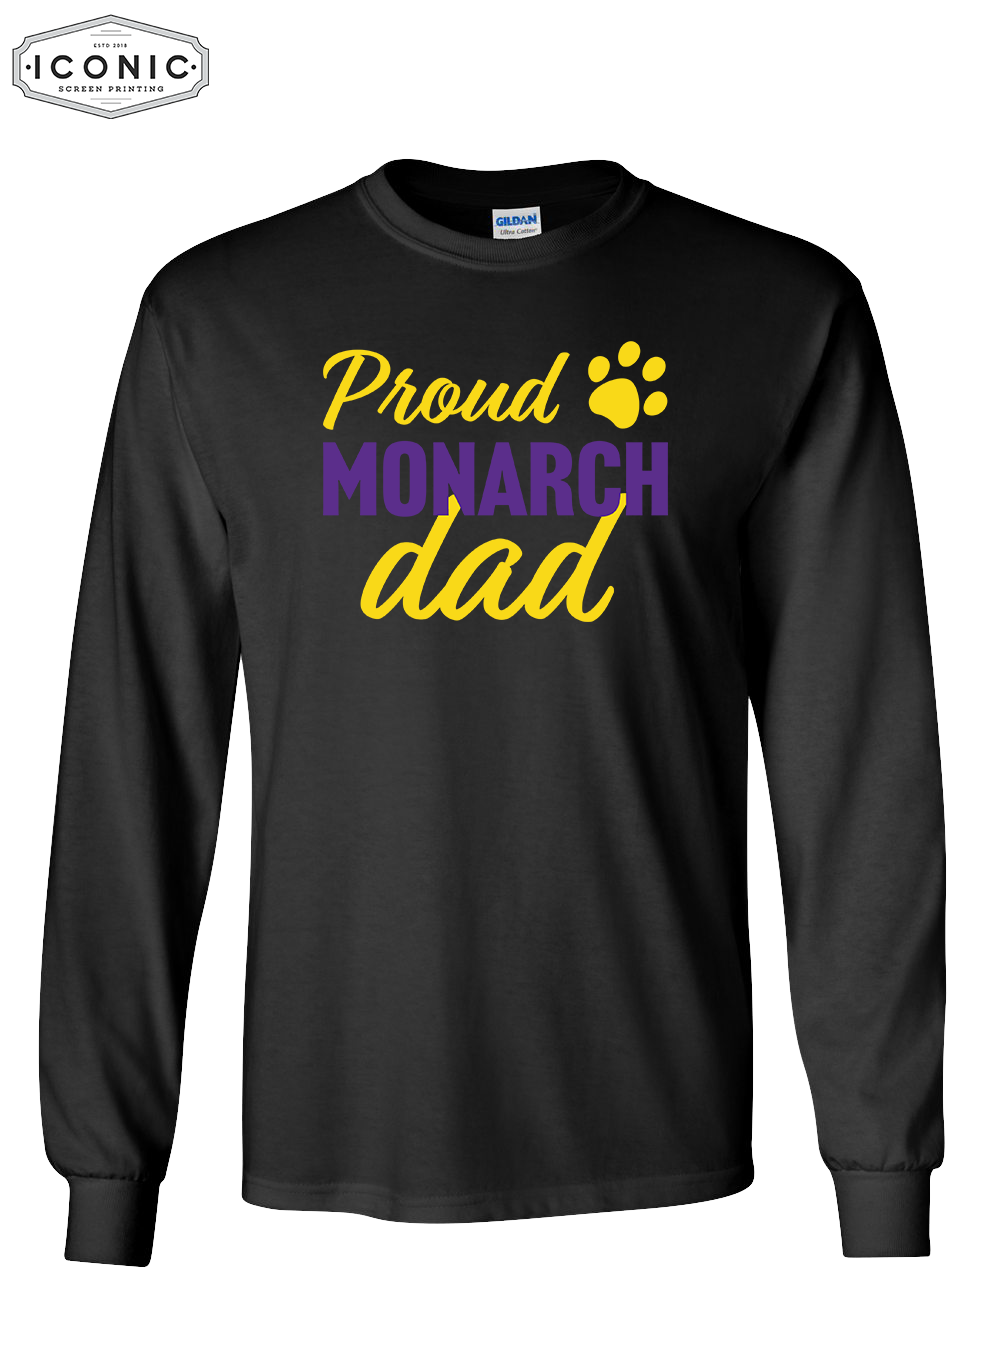 Proud Monarch Mom/Dad - Ultra Cotton Long Sleeve